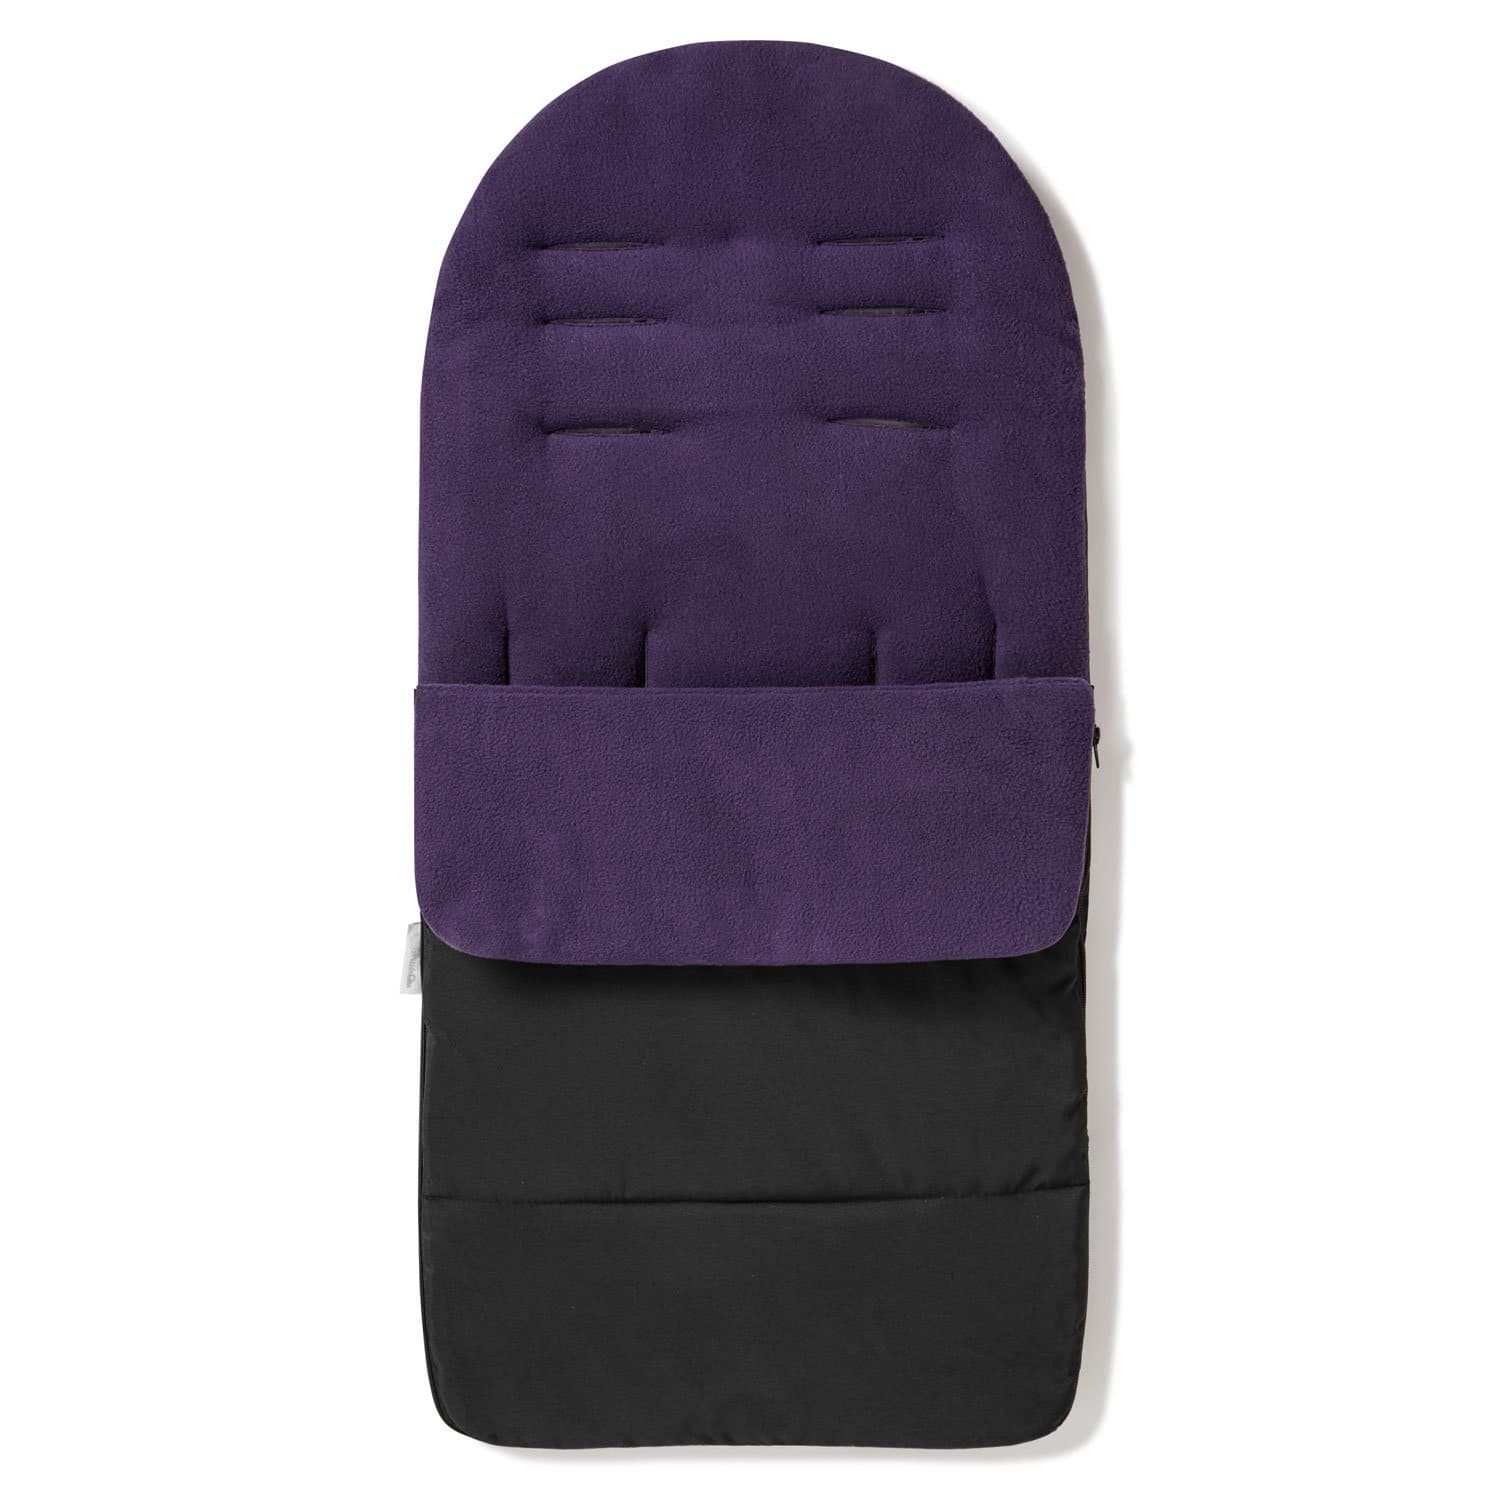 Premium Footmuff / Cosy Toes Compatible with Egg - Plum Purple / Fits All Models | For Your Little One